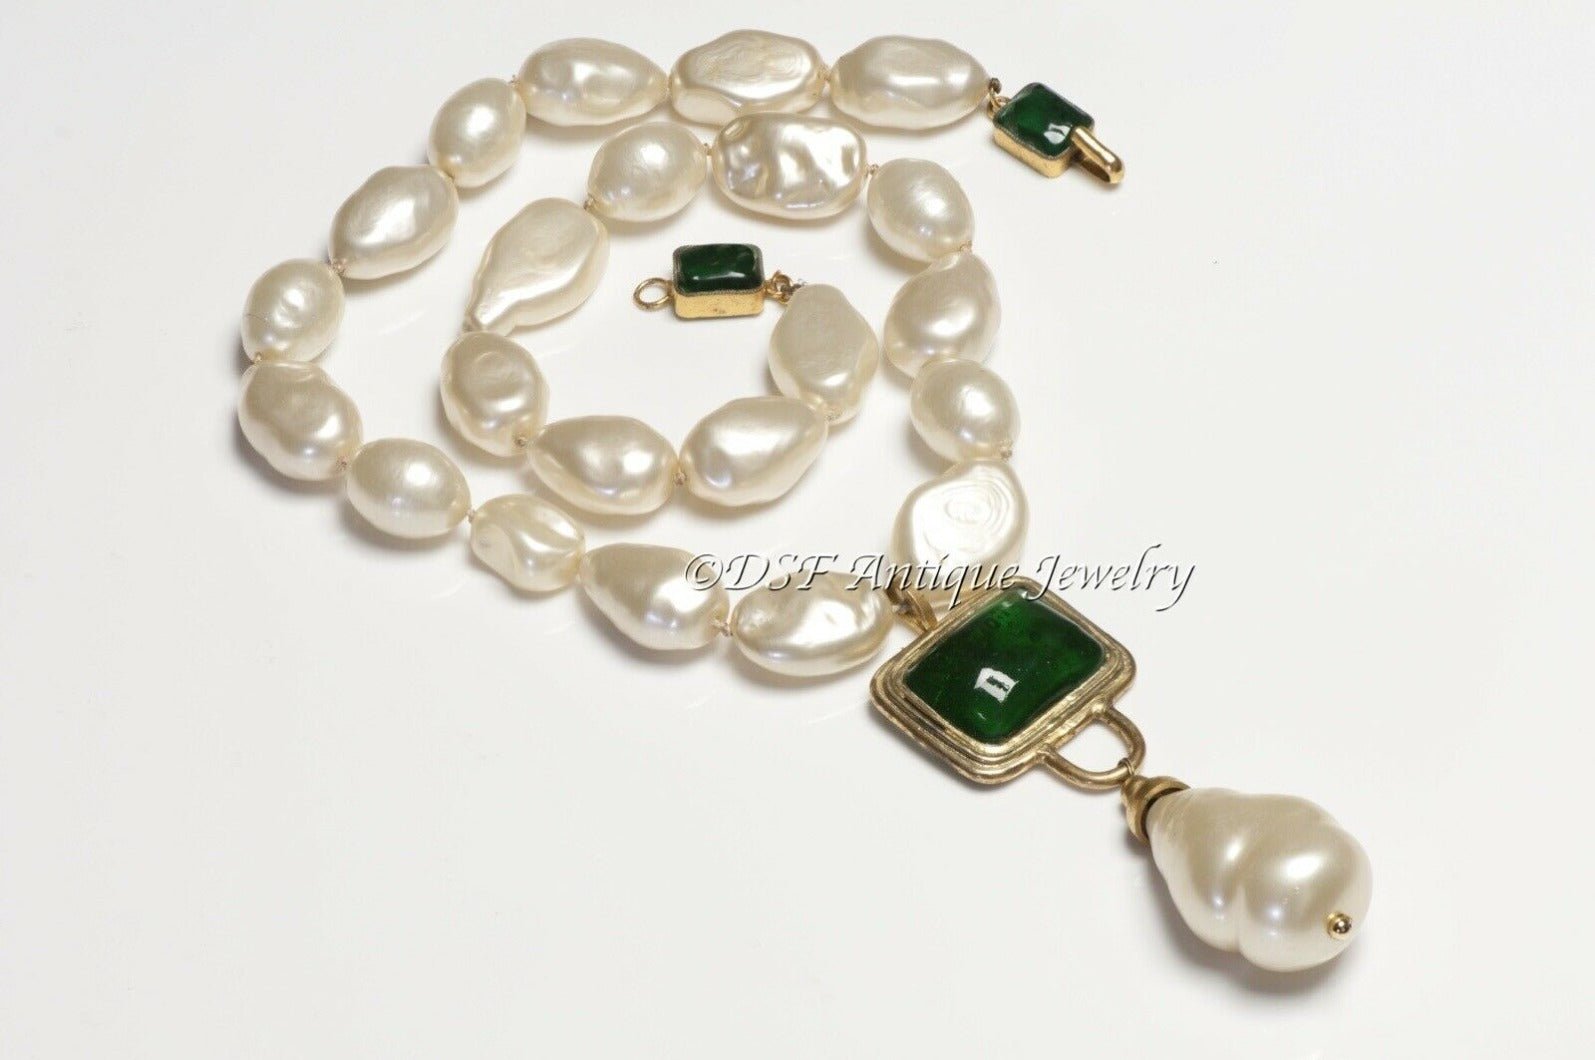 CHANEL Paris 1983 Couture Maison Gripoix Pearl Green Poured Glass Necklace - DSF Antique Jewelry